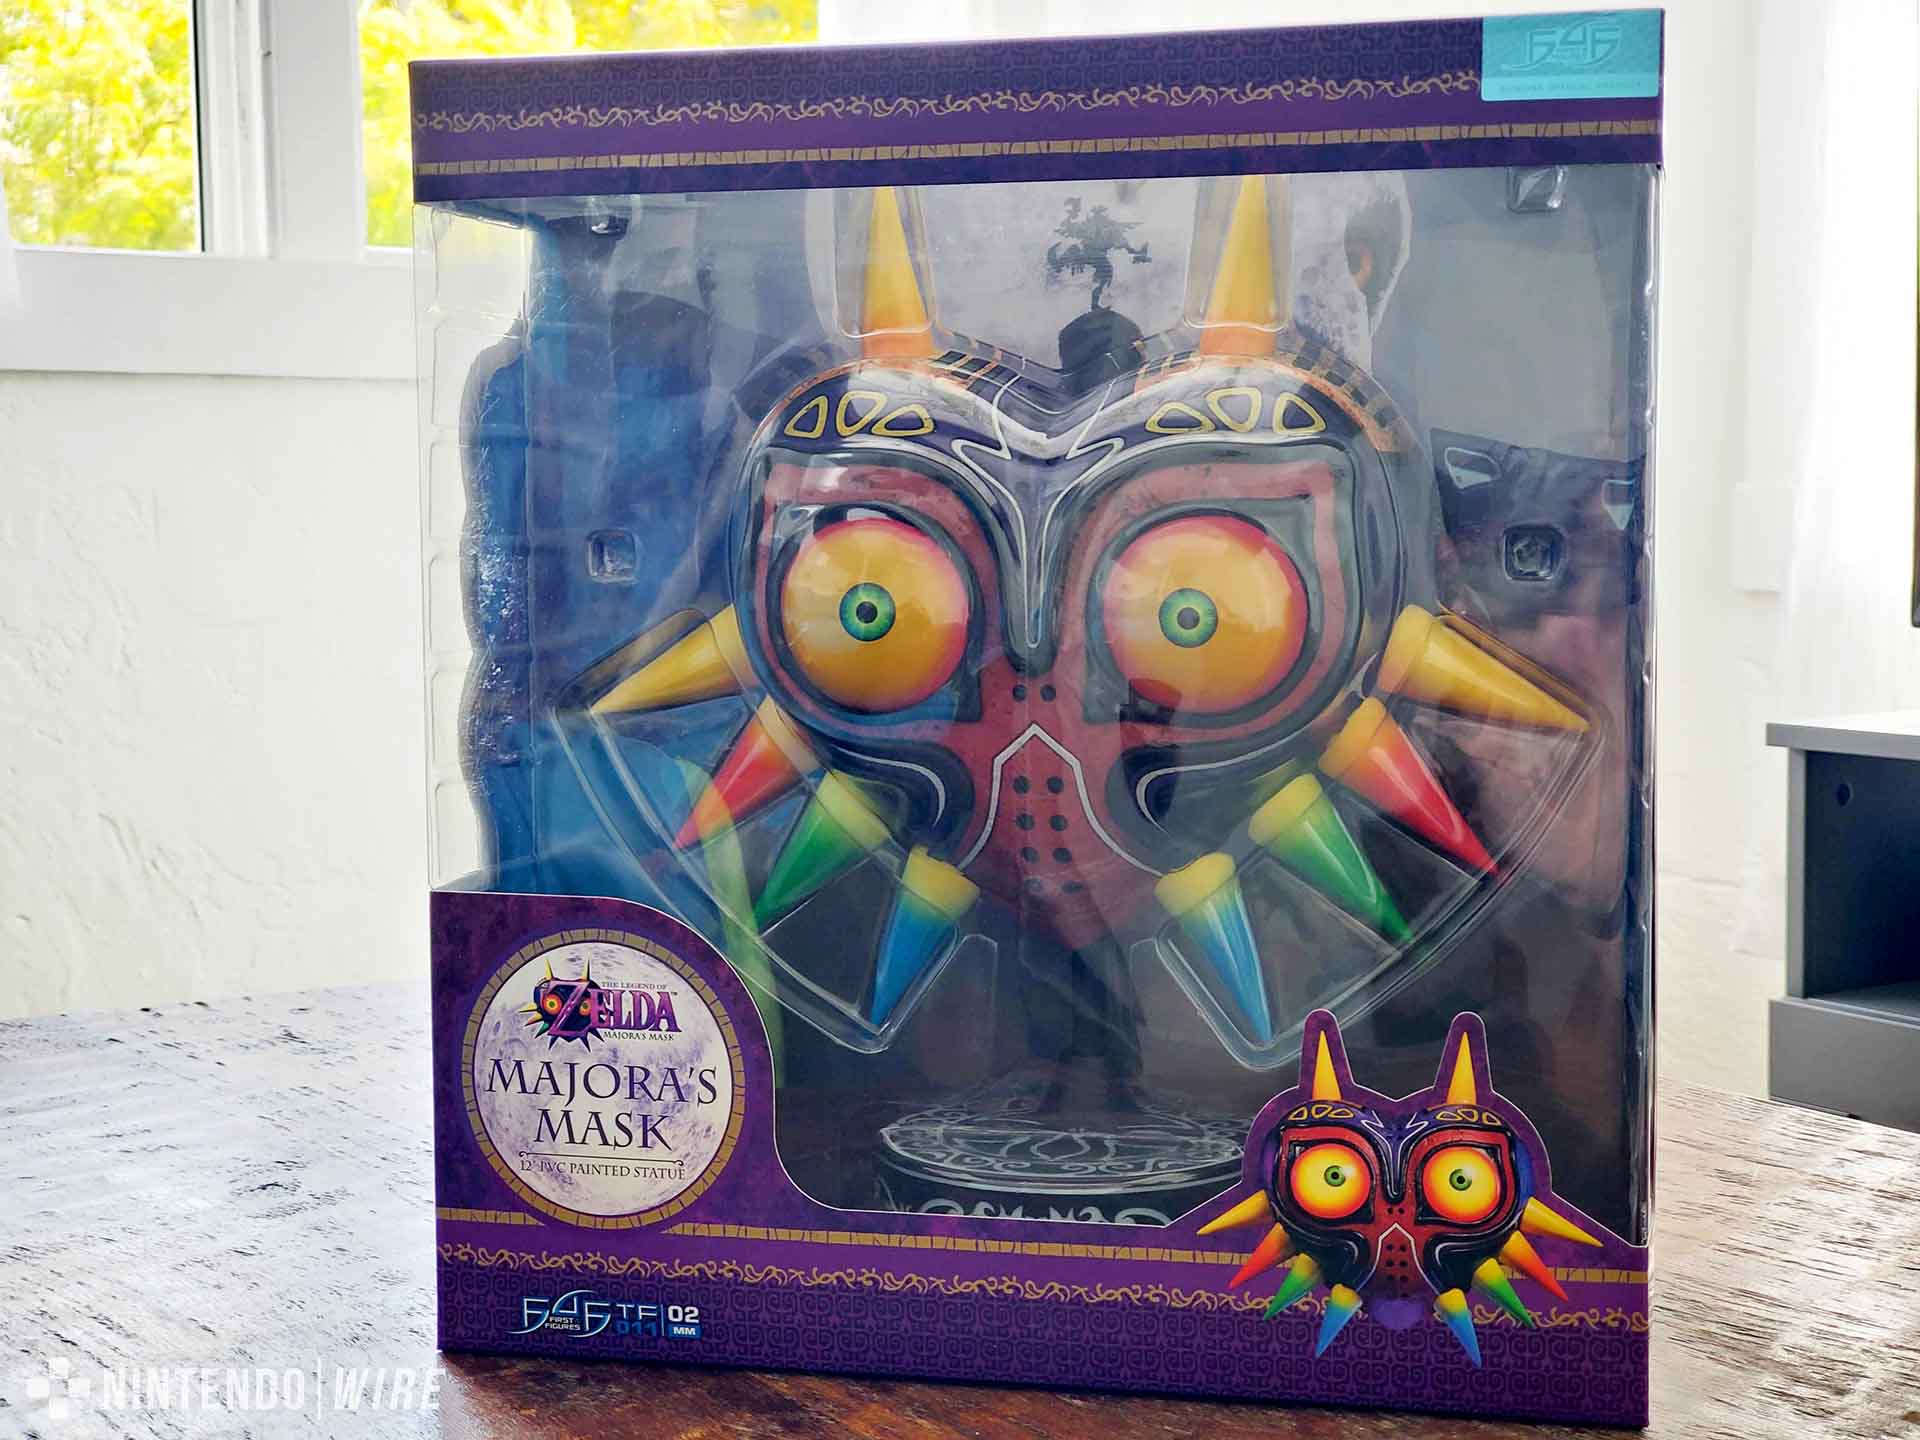 Gallery: The Legend of Zelda: Majora's Mask Statue by First 4 Figures –  Nintendo Wire